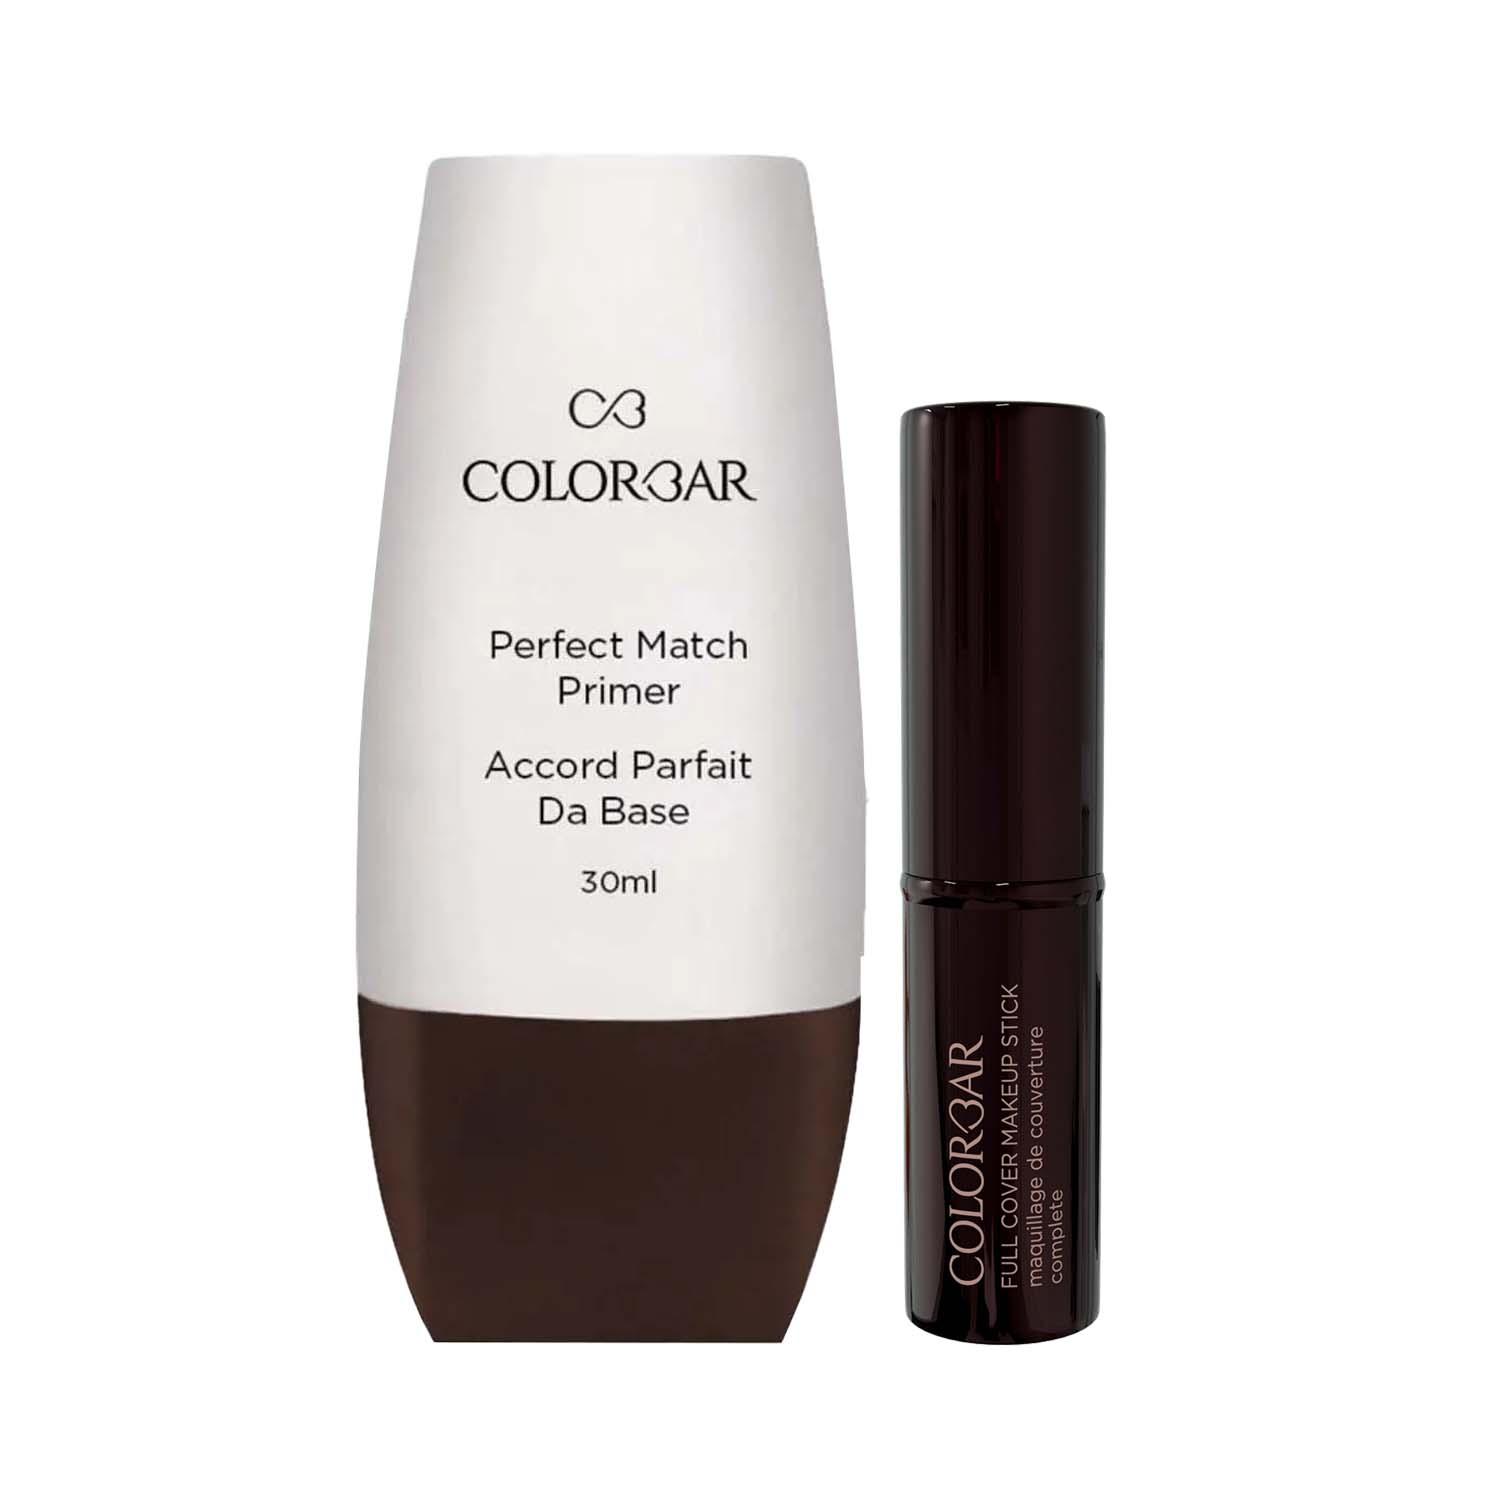 Colorbar | Colorbar New Perfect Match Primer (30 ml) + Colorbar Full Cover Make Up Stick - Fresh Ivory Combo